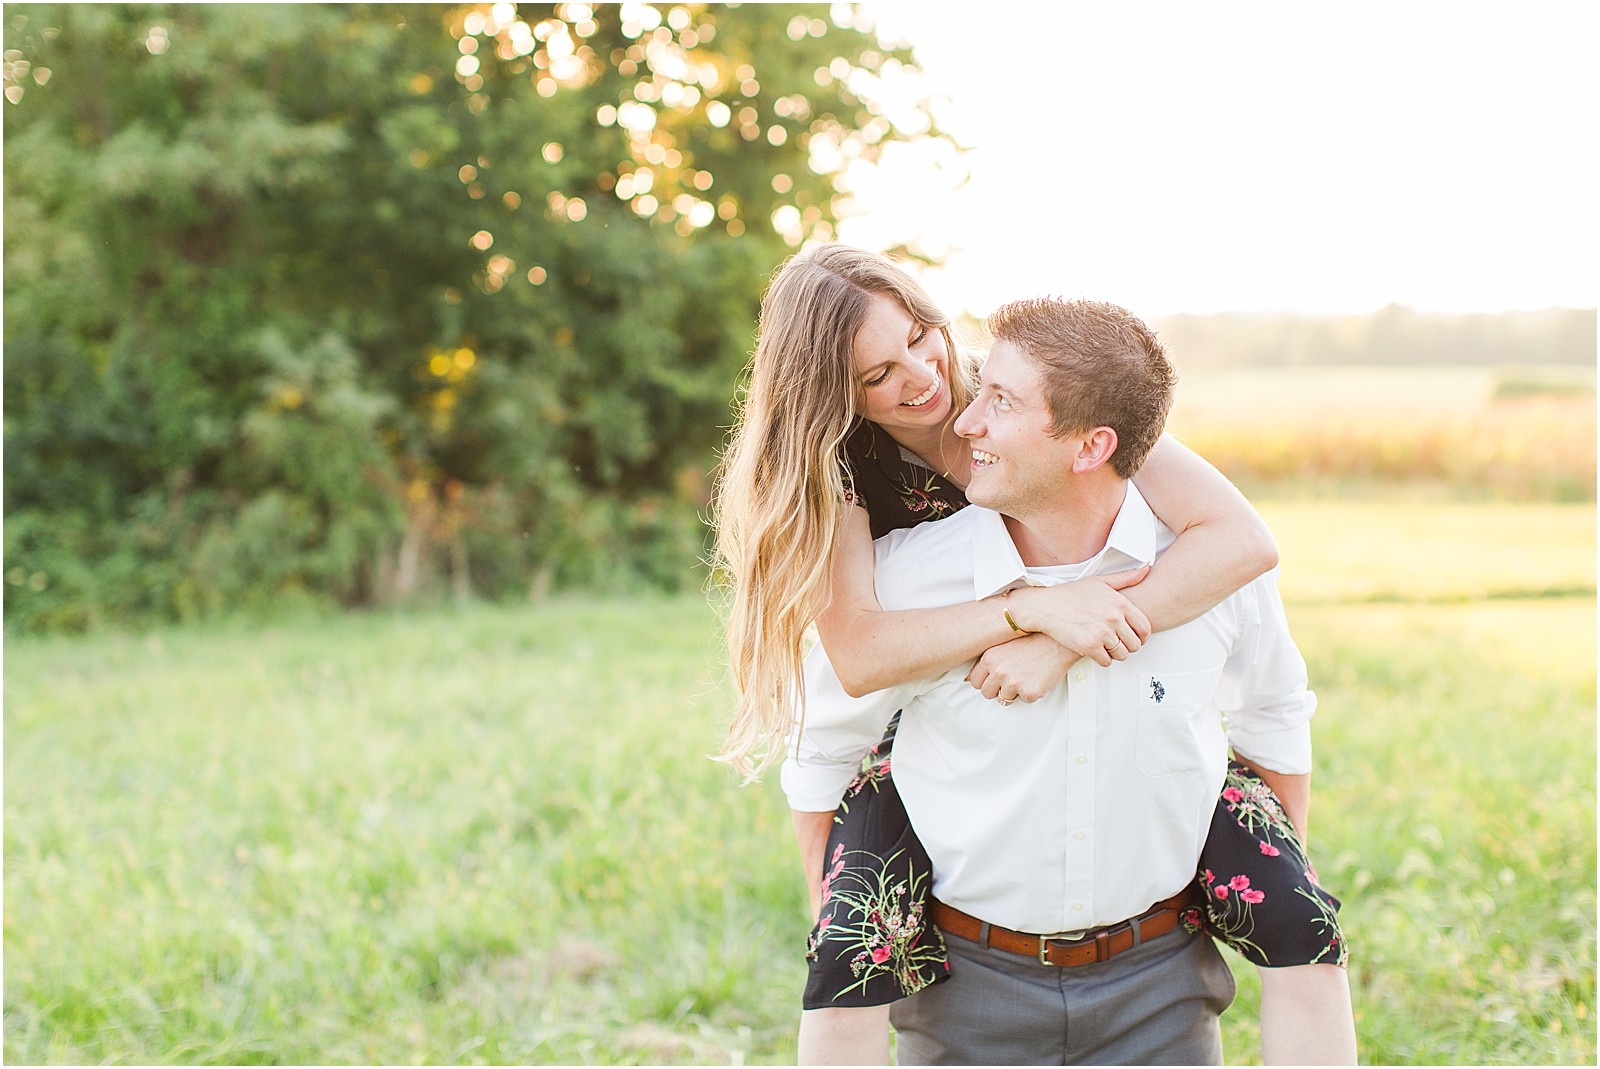 A Jasper Indiana Engagement Session | Tori and Kyle | Bret and Brandie Photography034.jpg